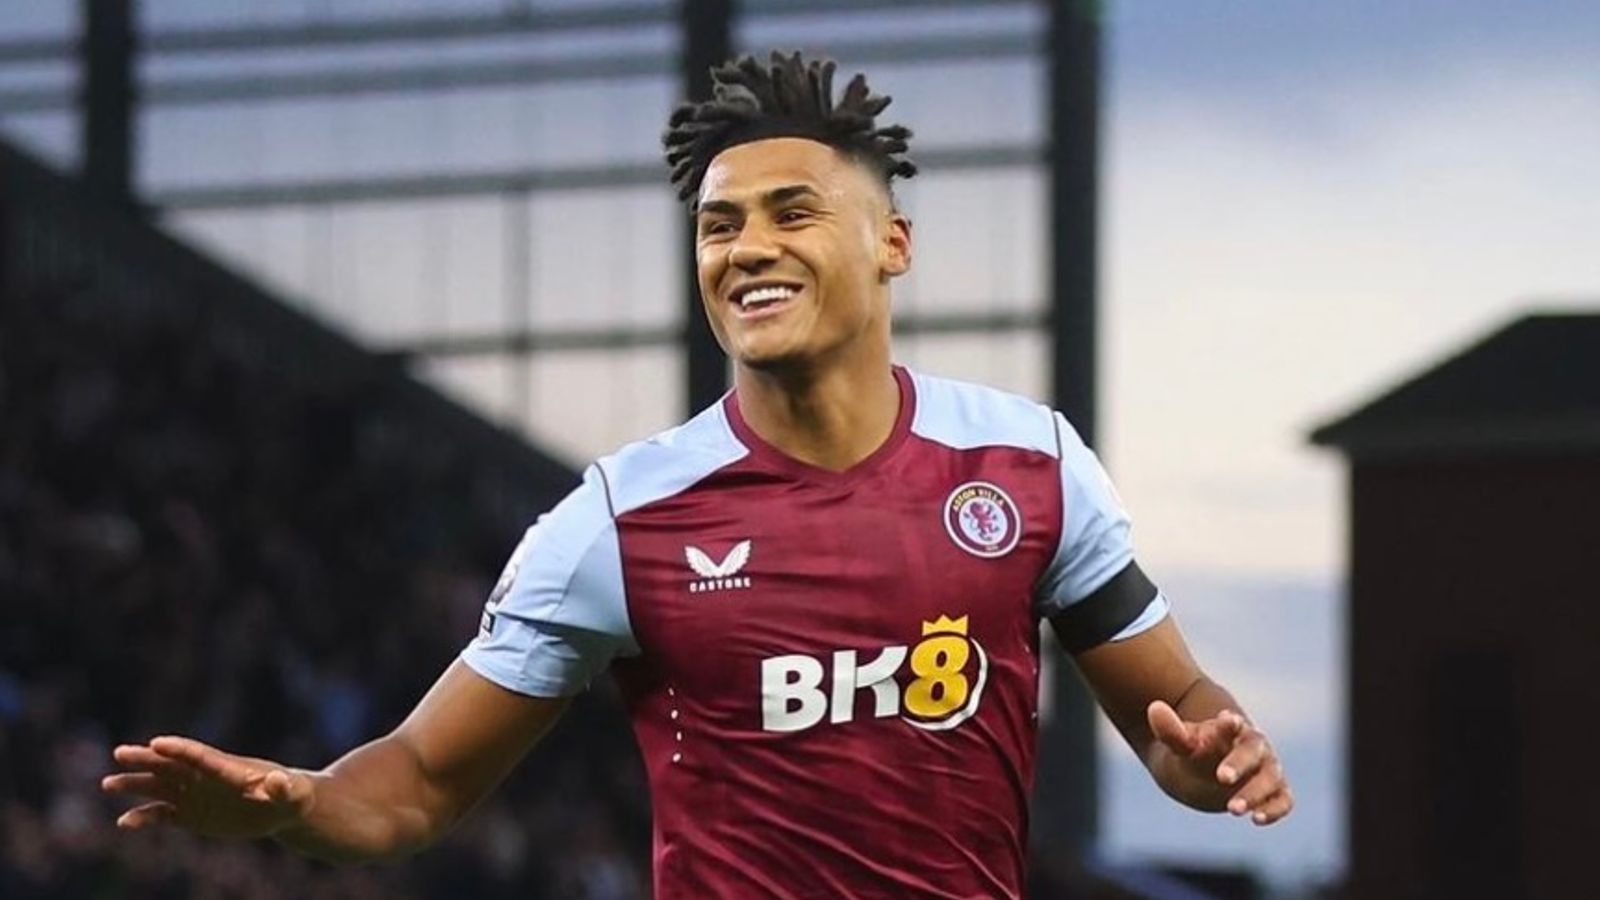 England striker Ollie Watkins aims to score with backing for sneaker  platform | Business News | Sky News